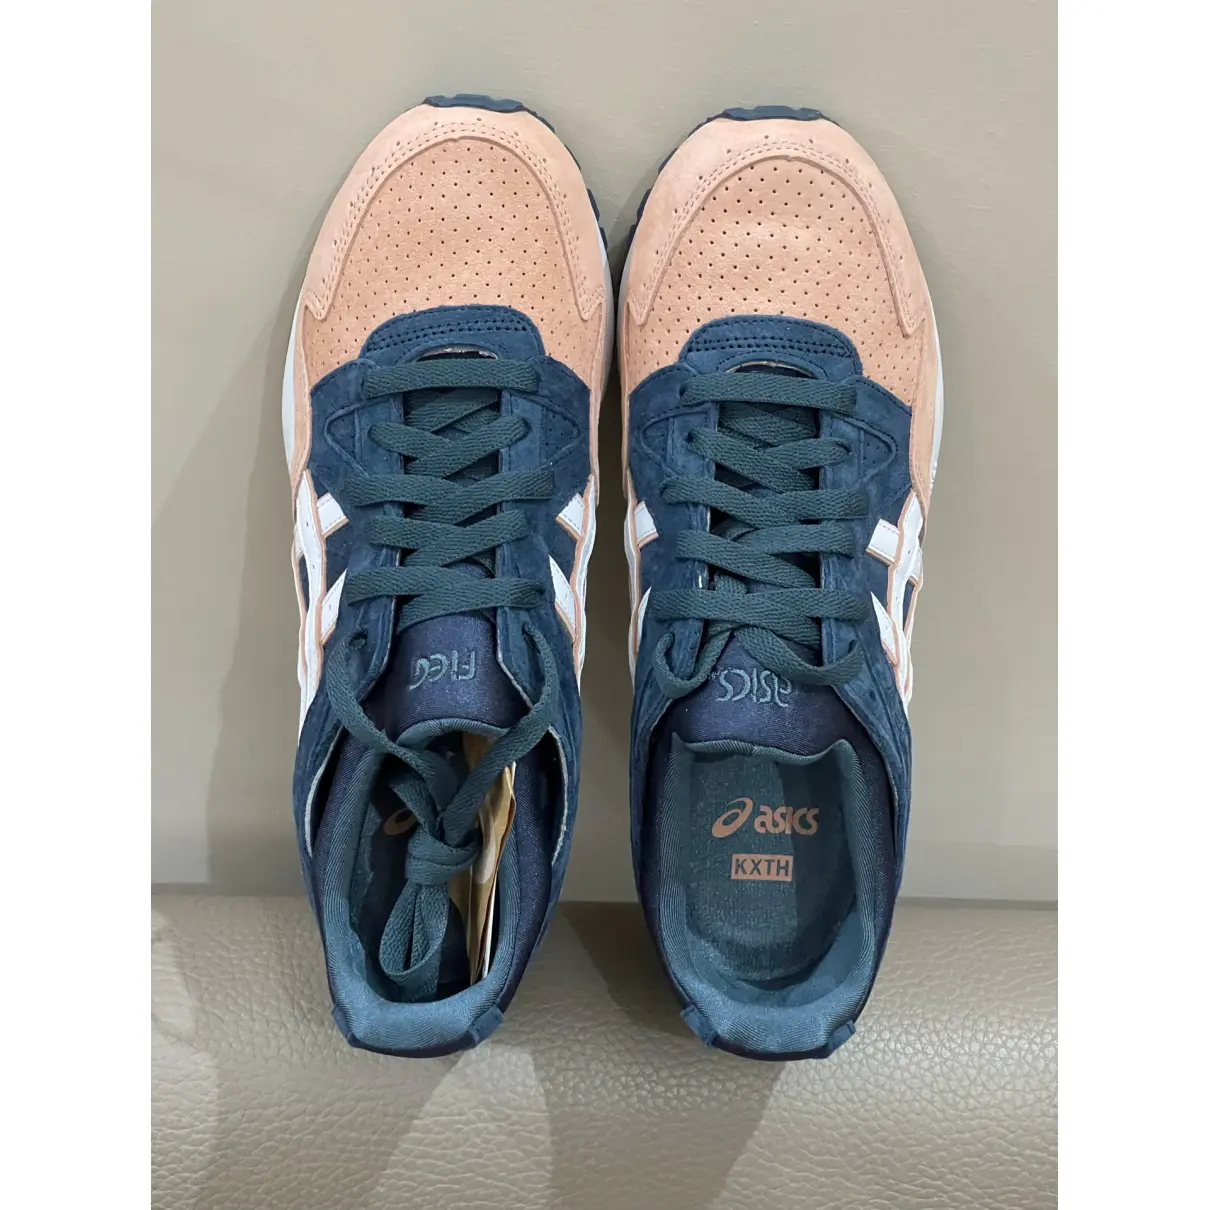 Buy Asics Leather low trainers online